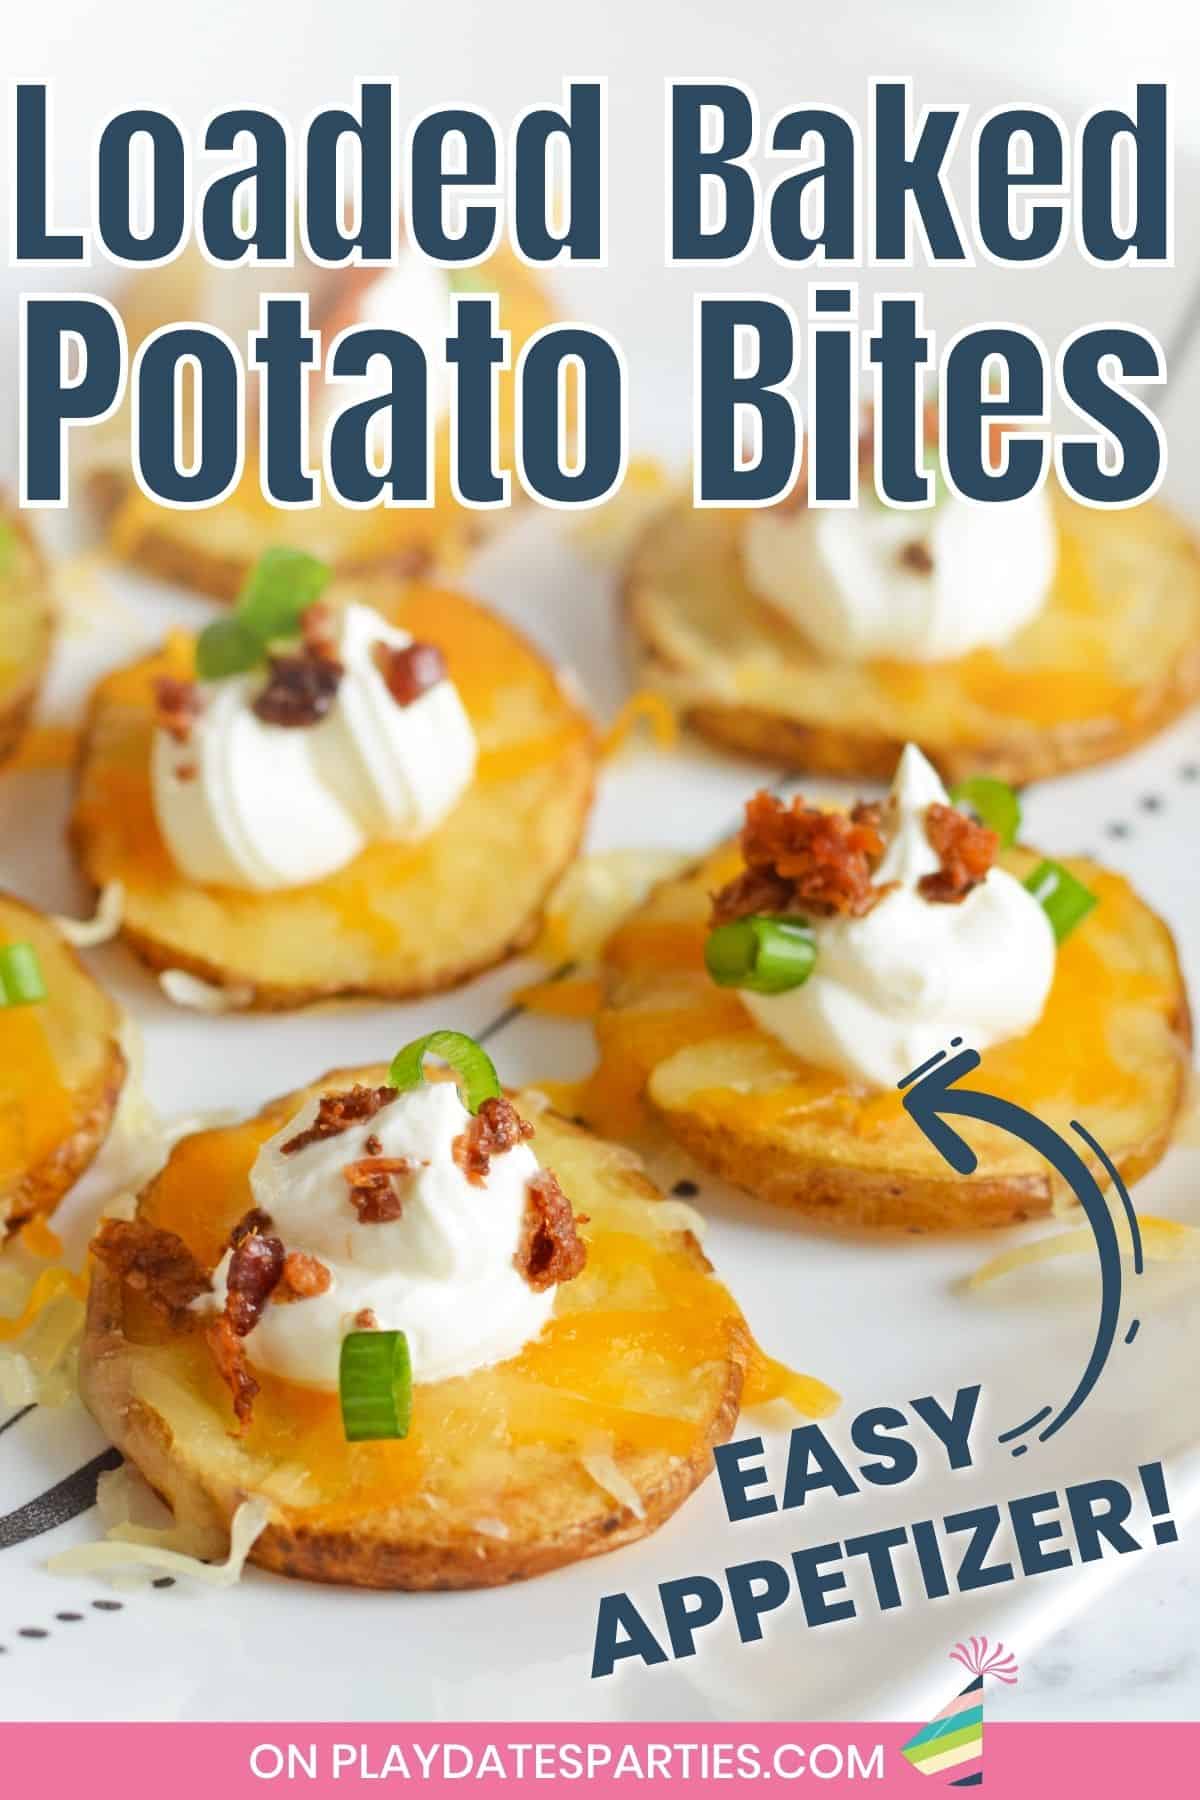 Appetizers on a white plate with text loaded baked potato bites easy appetizer.